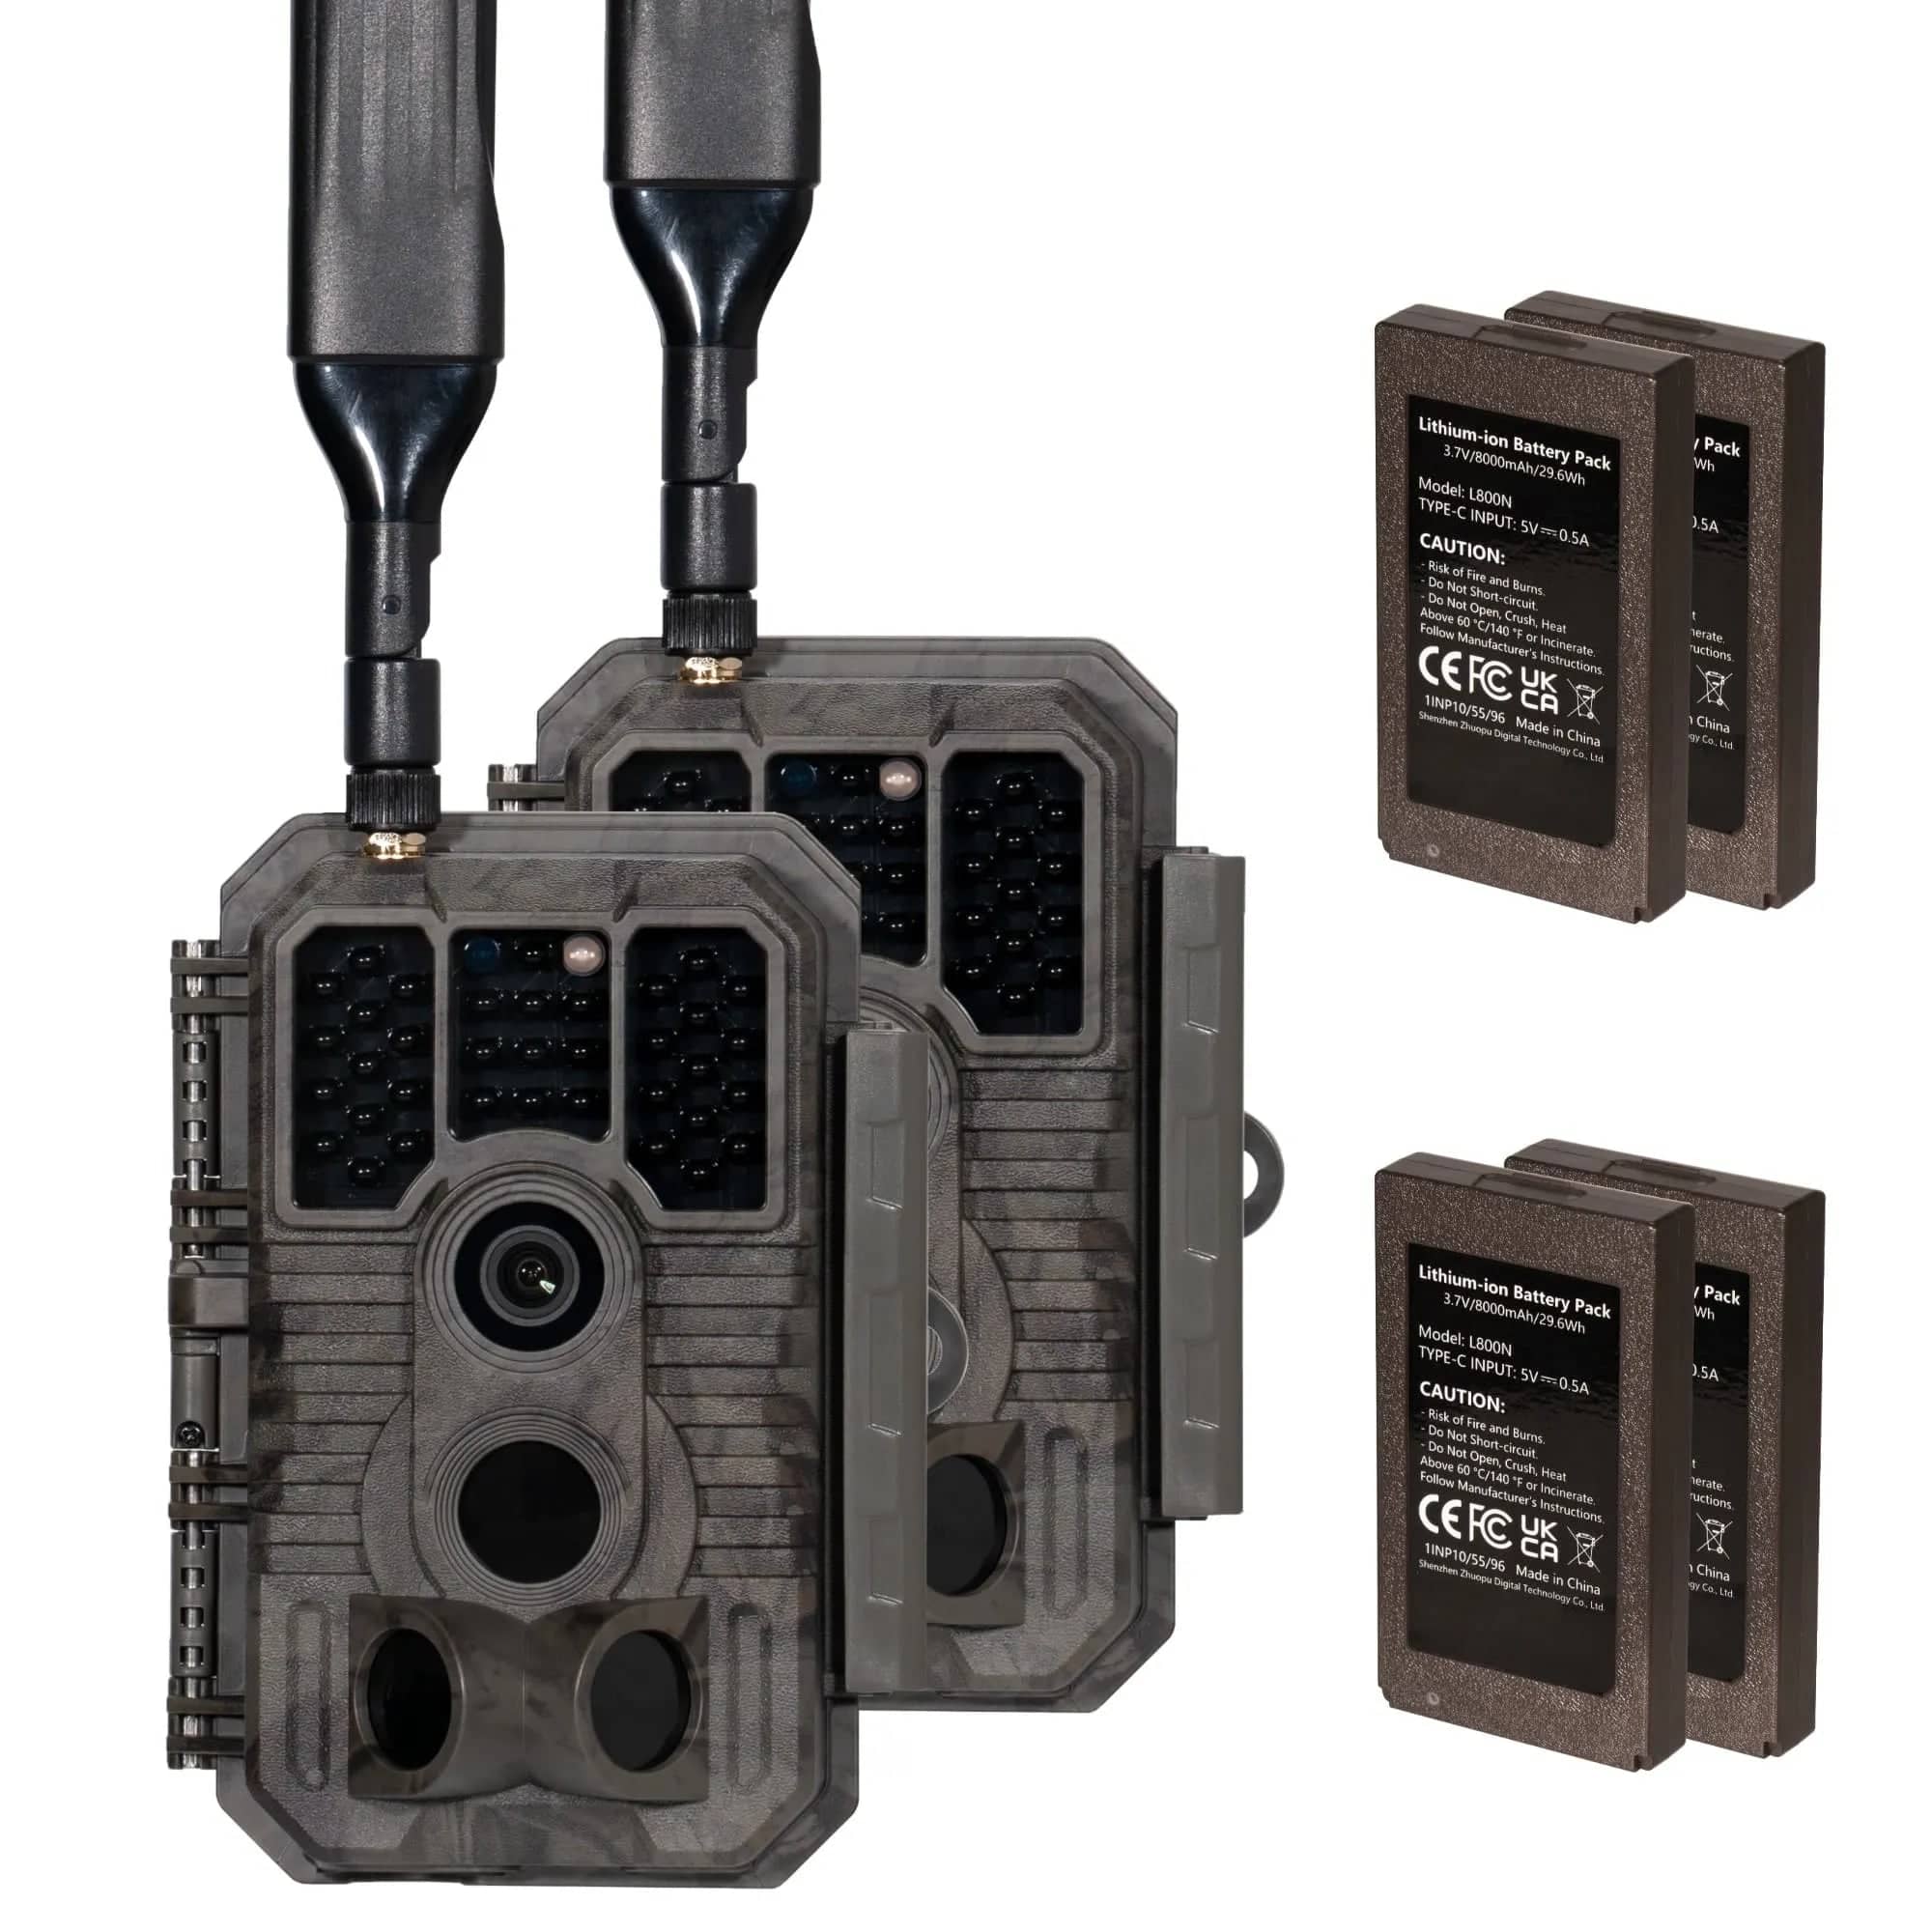 GardePro Cellular Trail Camera X60P Pre-Installed Contract SIM With Rechargeable Battery 2-Pack